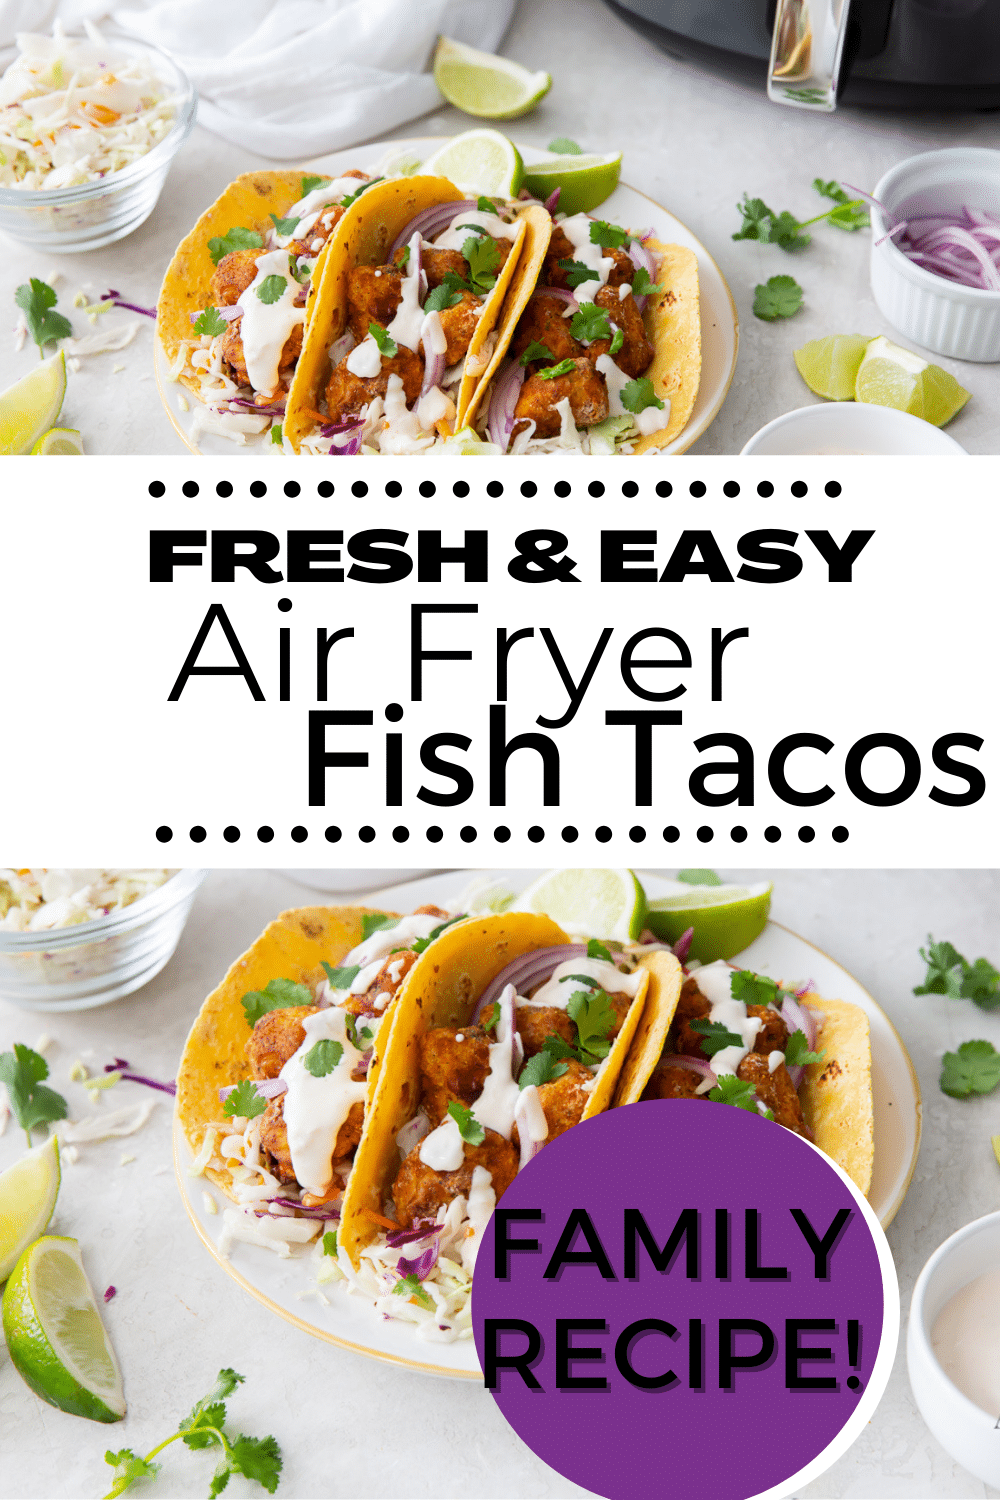 images of crispy air fryer fish tacos with text overlay